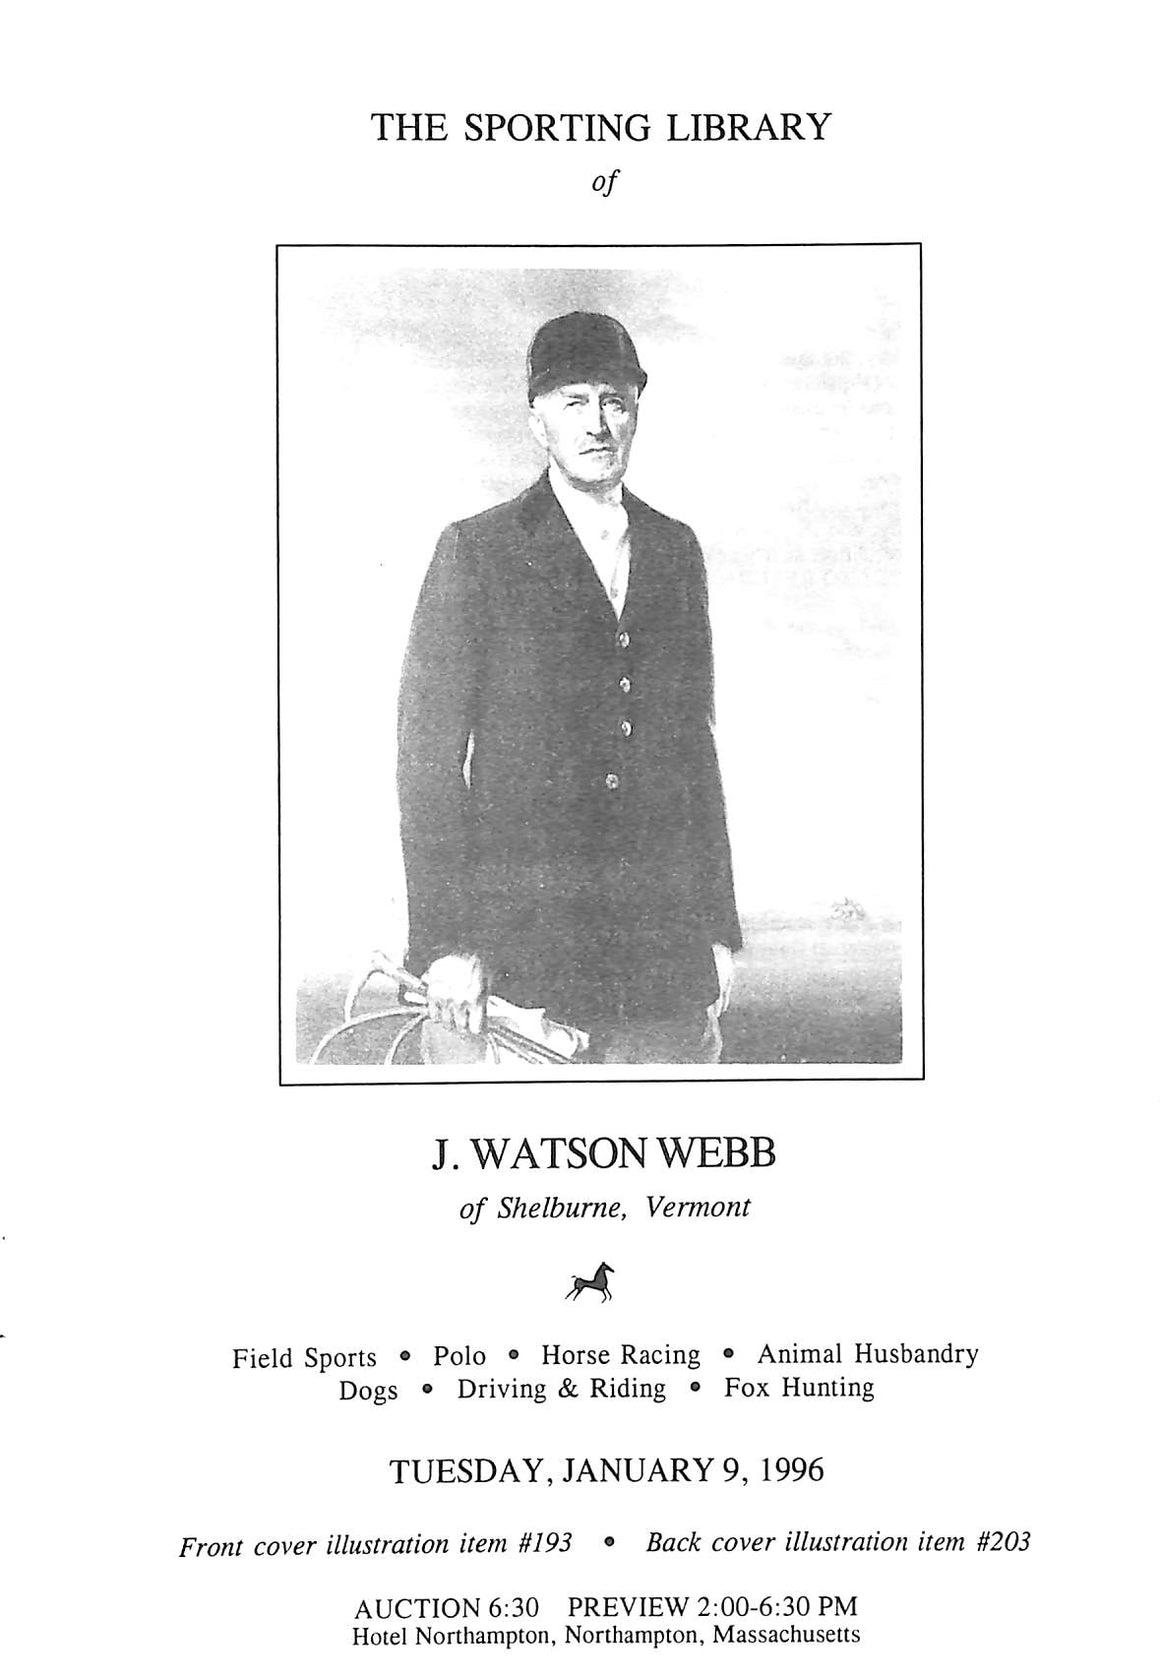 "The Sporting Library Of The Late J. Watson Webb 1996"